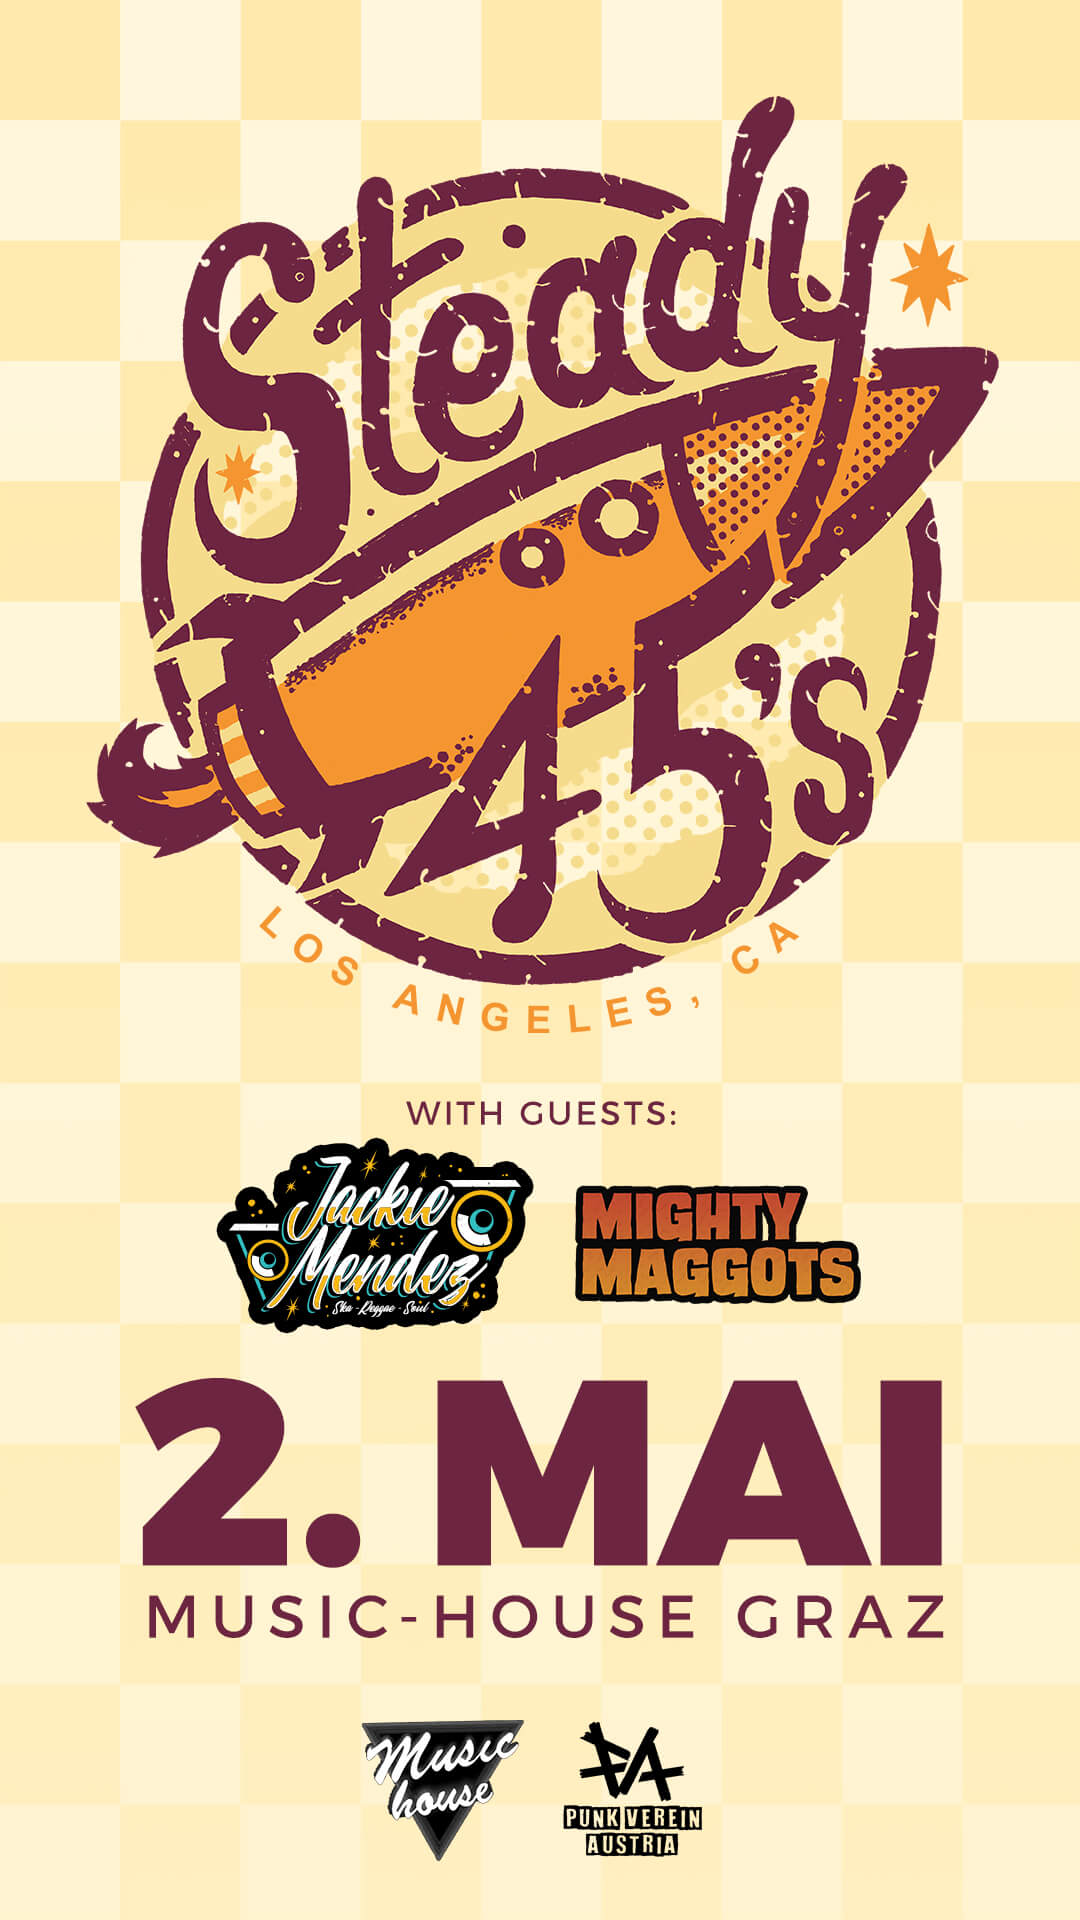 THE STEADY 45s (US) w/ Jackie Mendez (US) & Mighty Maggots (AT)